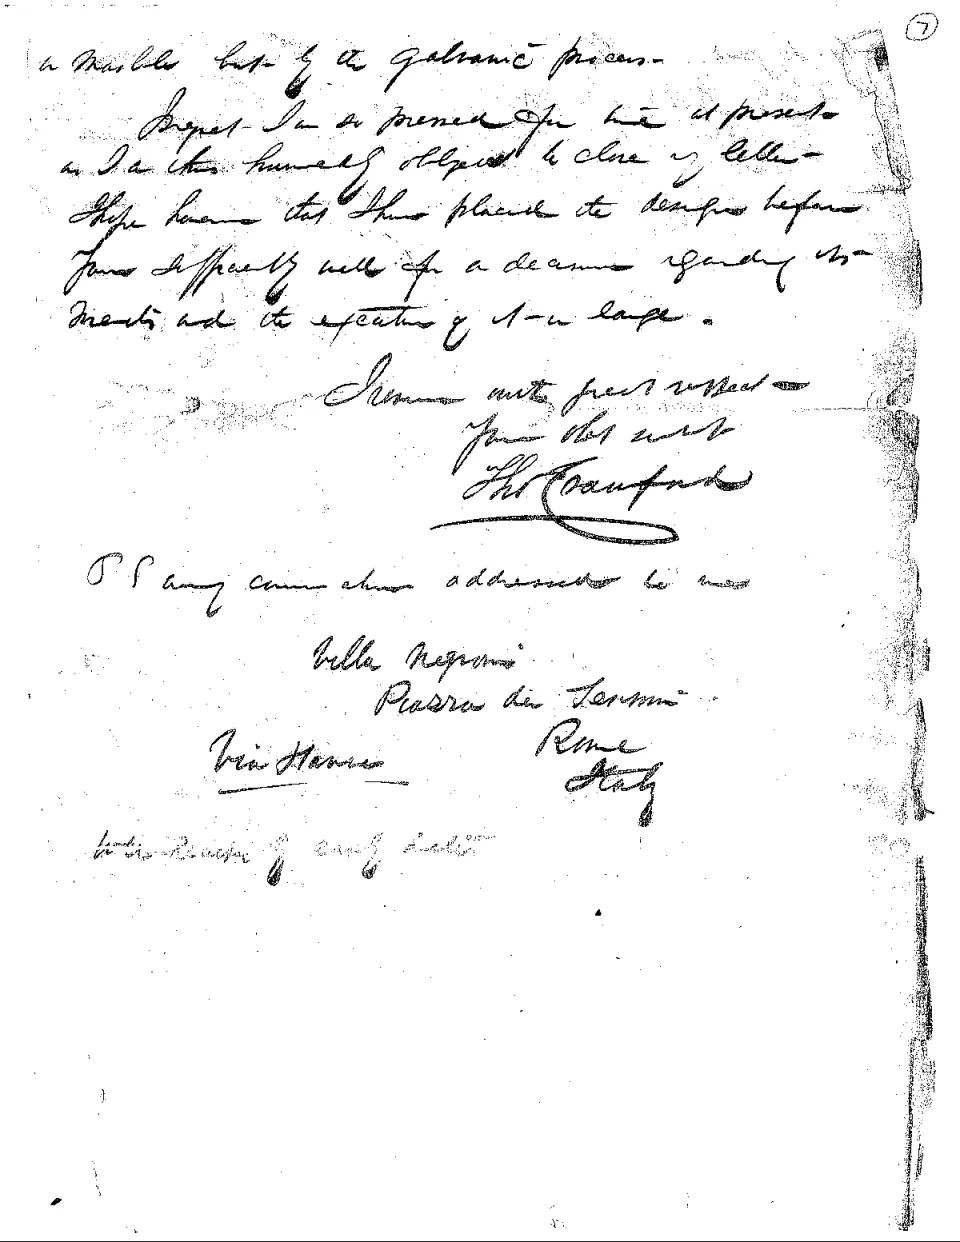 Final page of the letter Thomas Crawford wrote to Captain Montgomery Meigs about the pediment.